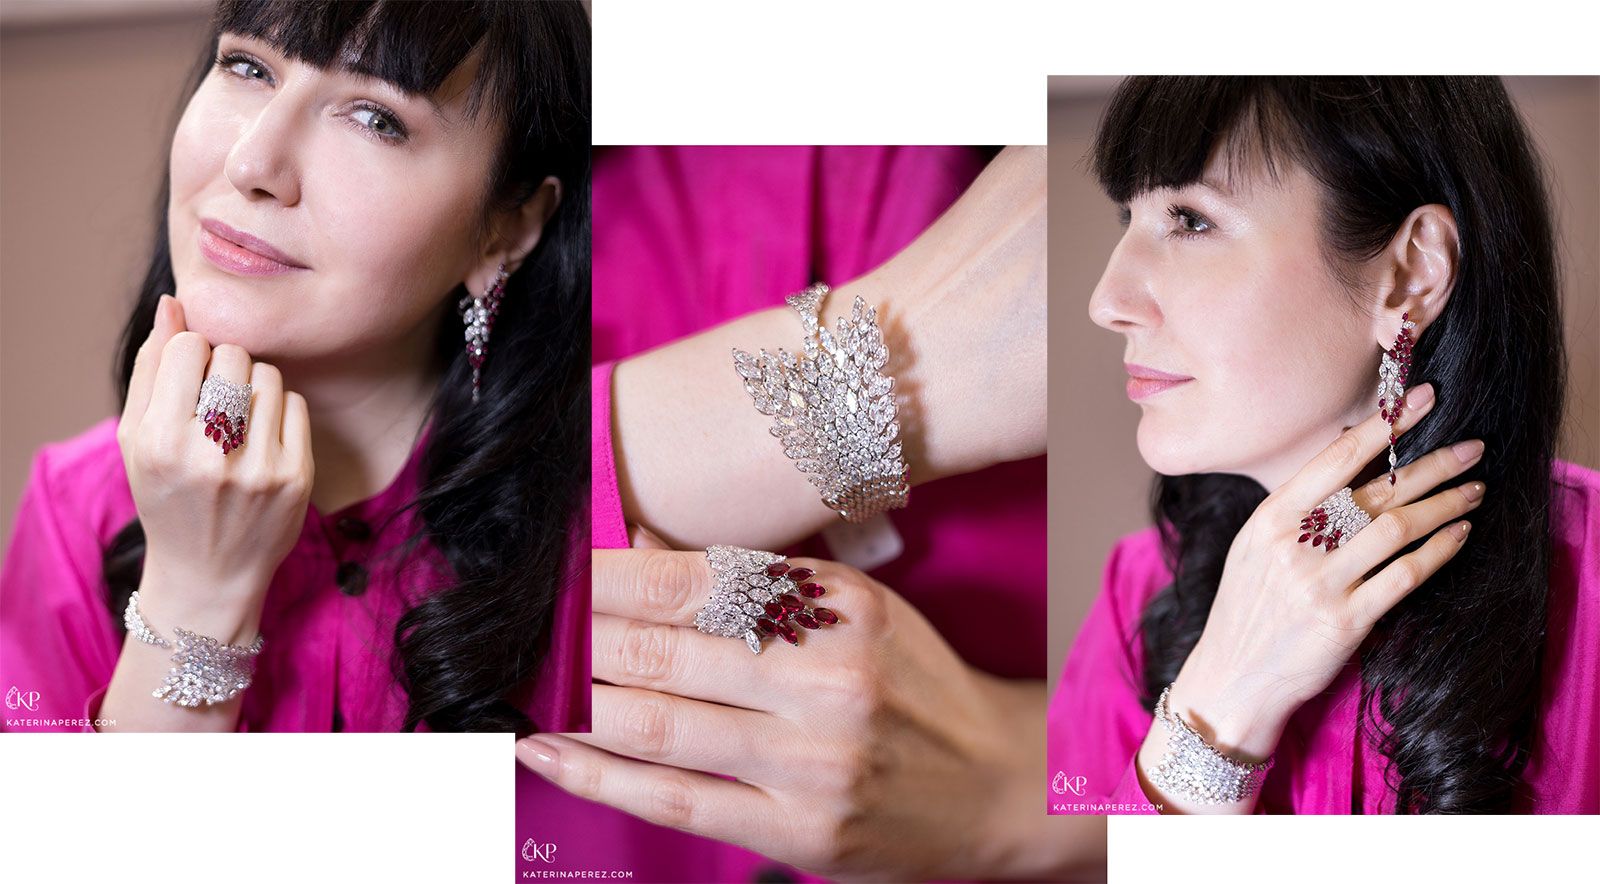 Katerina Perez wears a bracelet, ring and earrings from the Luvor Angelo collection with diamonds and rubies